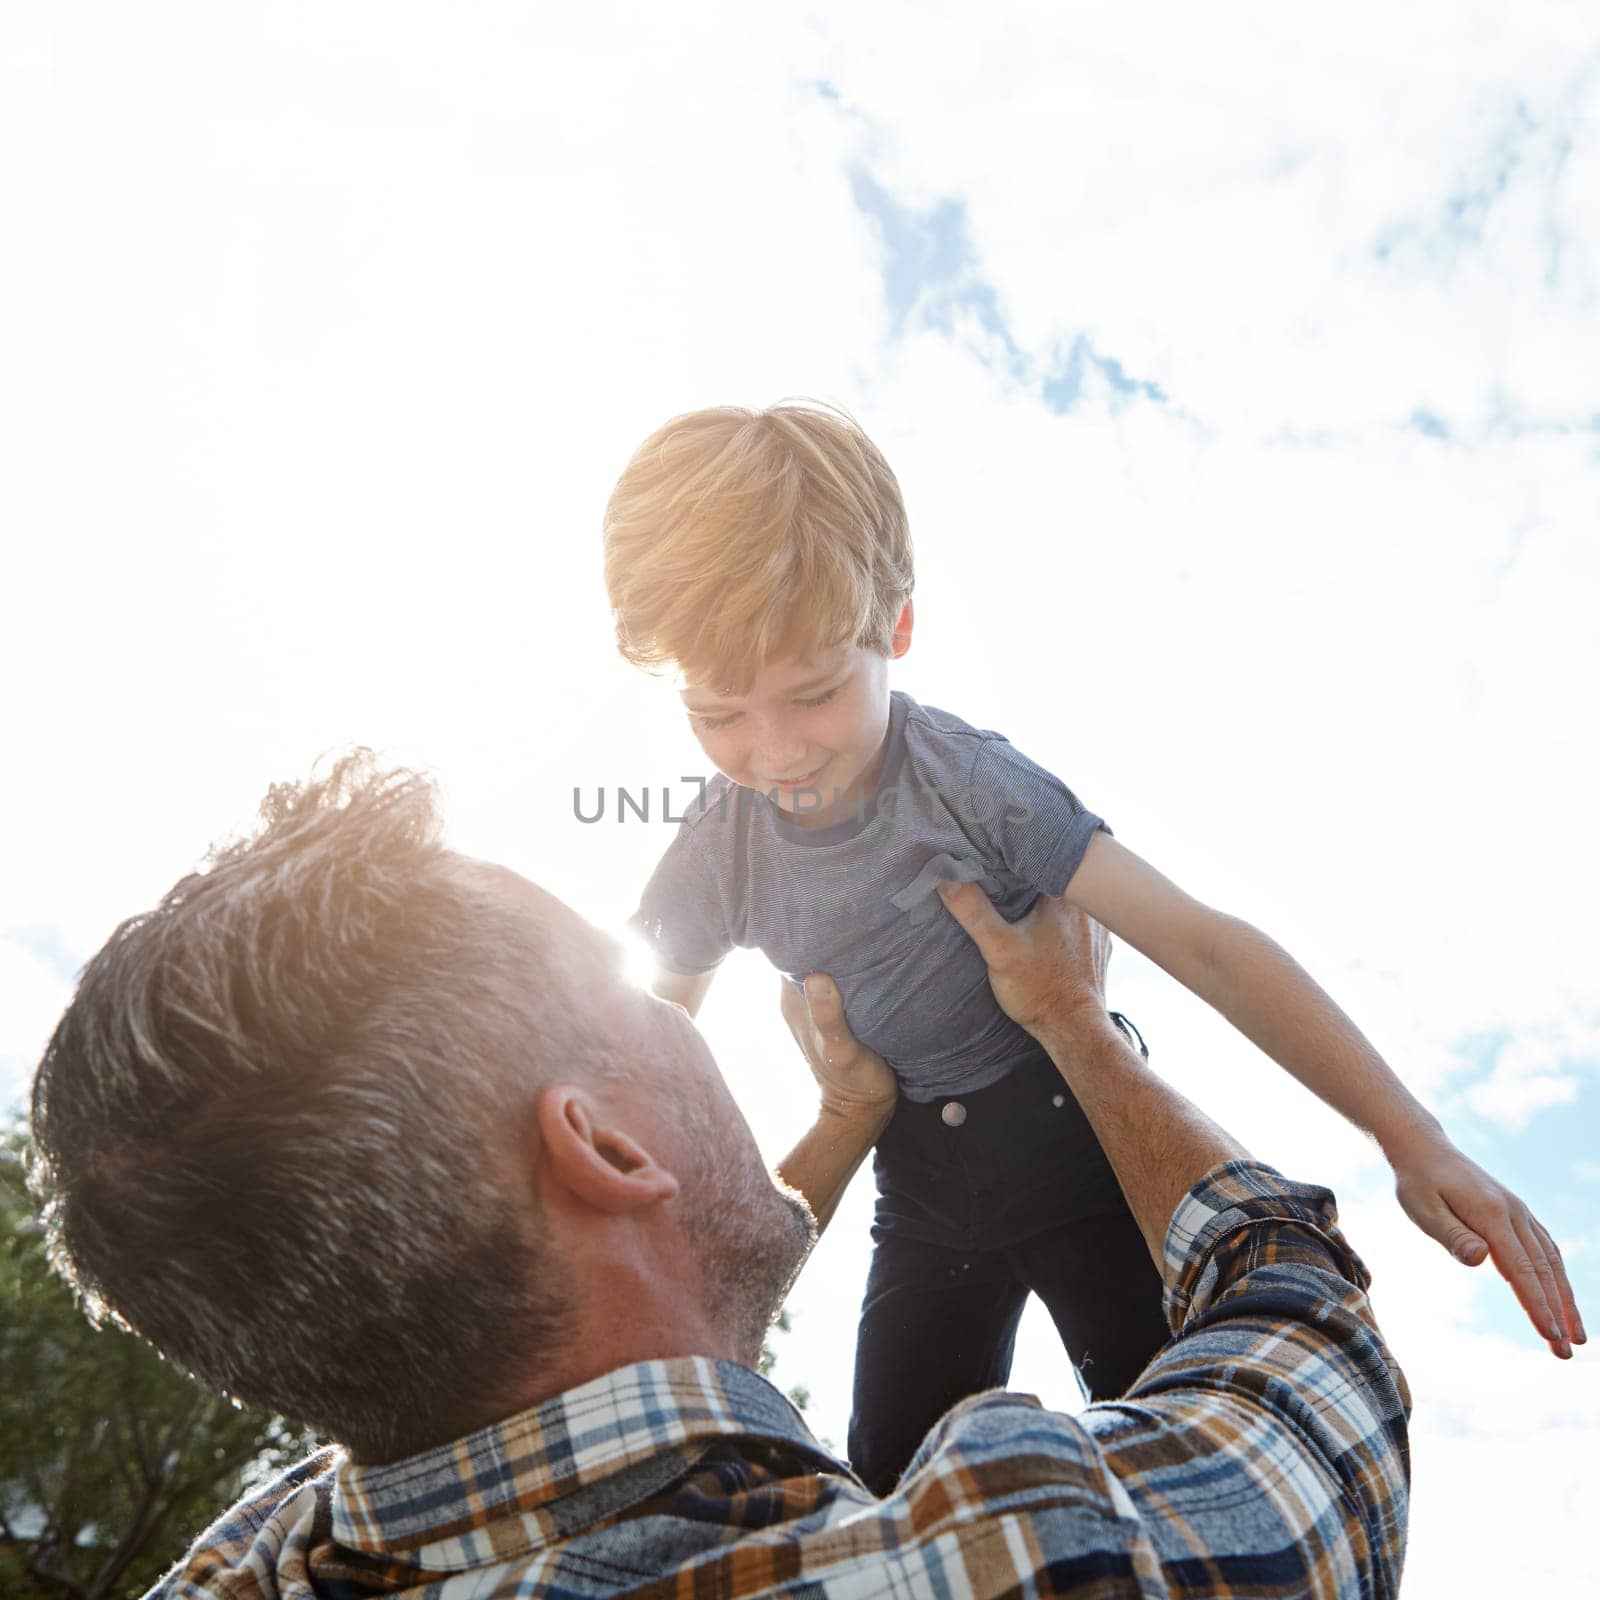 Raising him to incredible heights. a father lifting his son high into the air